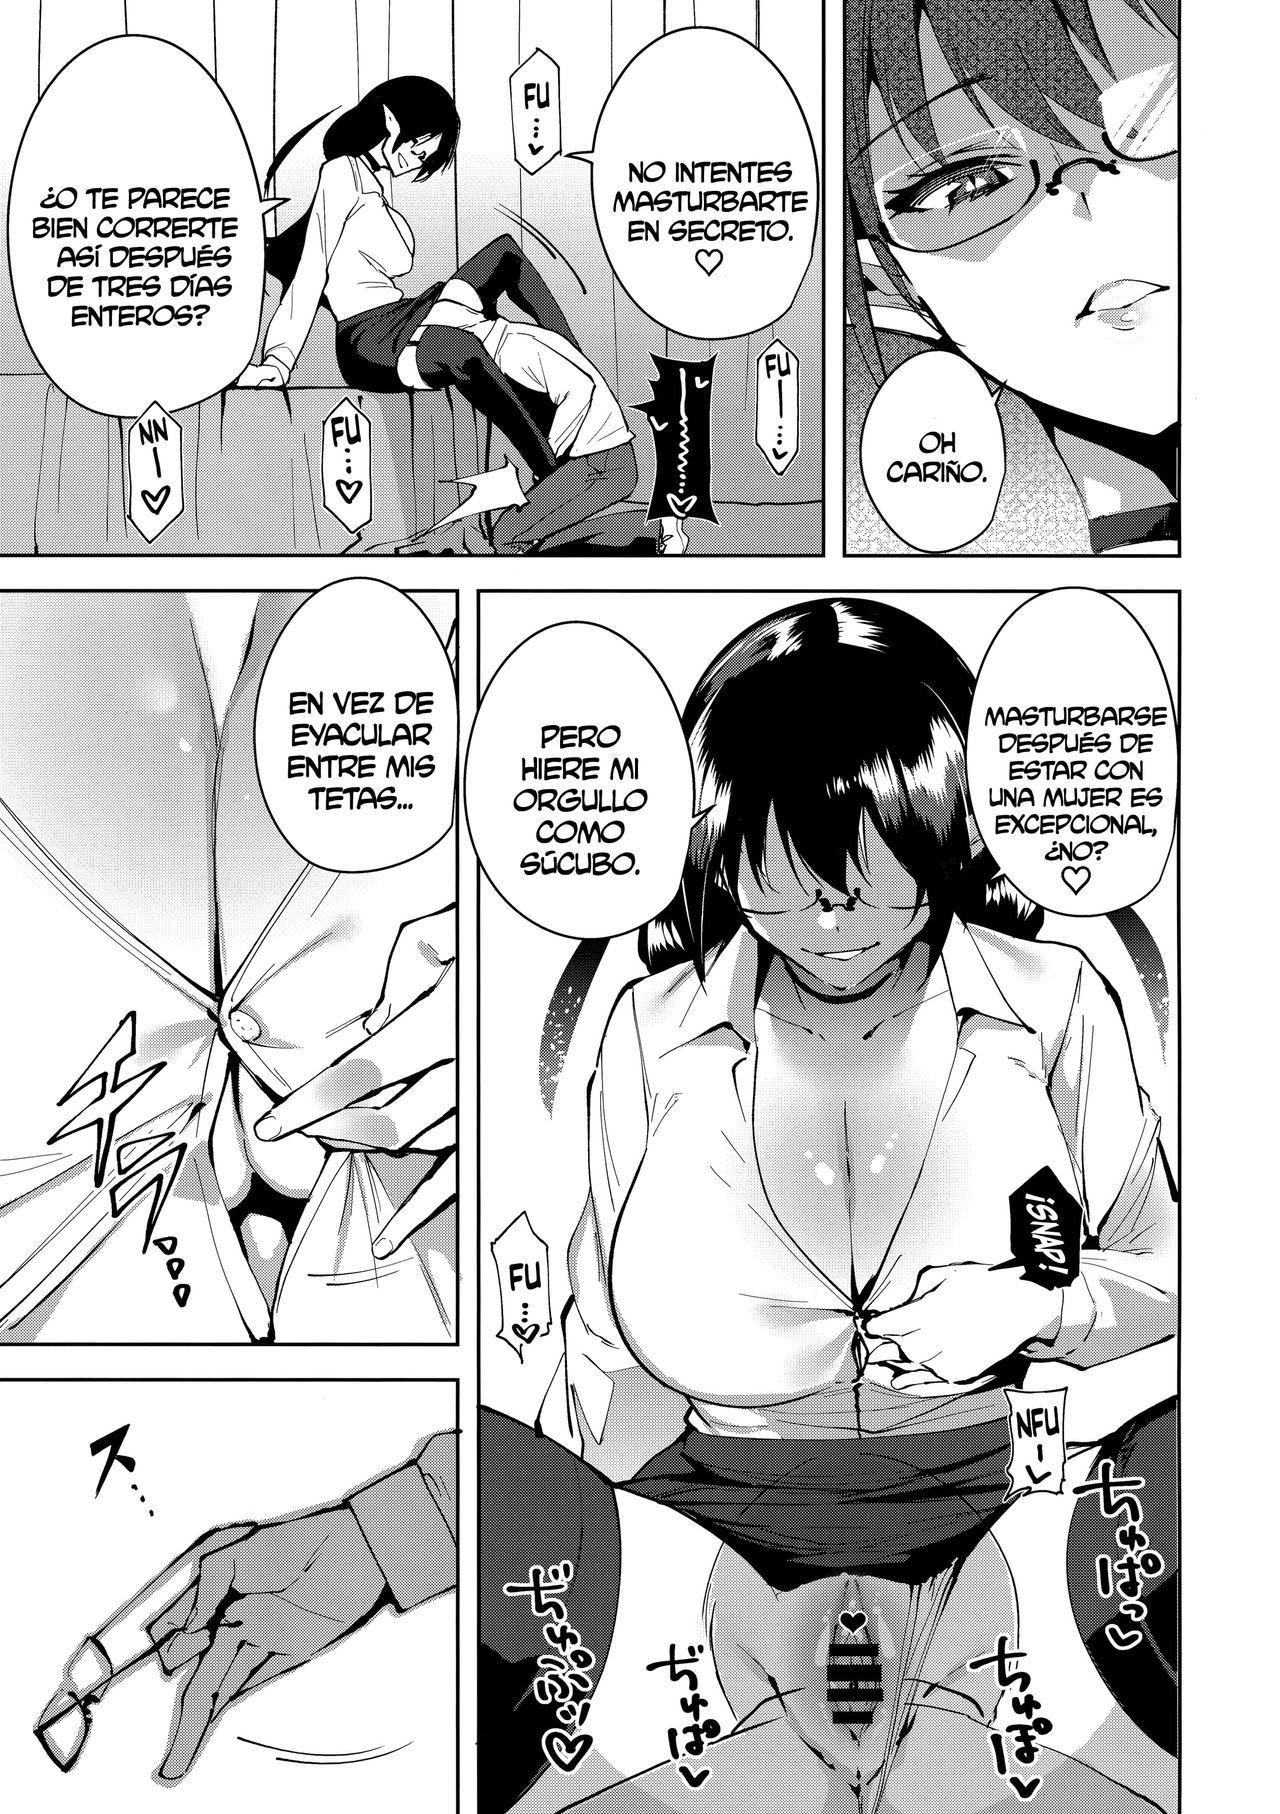 The-Evil-of-Commons-2-Hentai-05.jpg